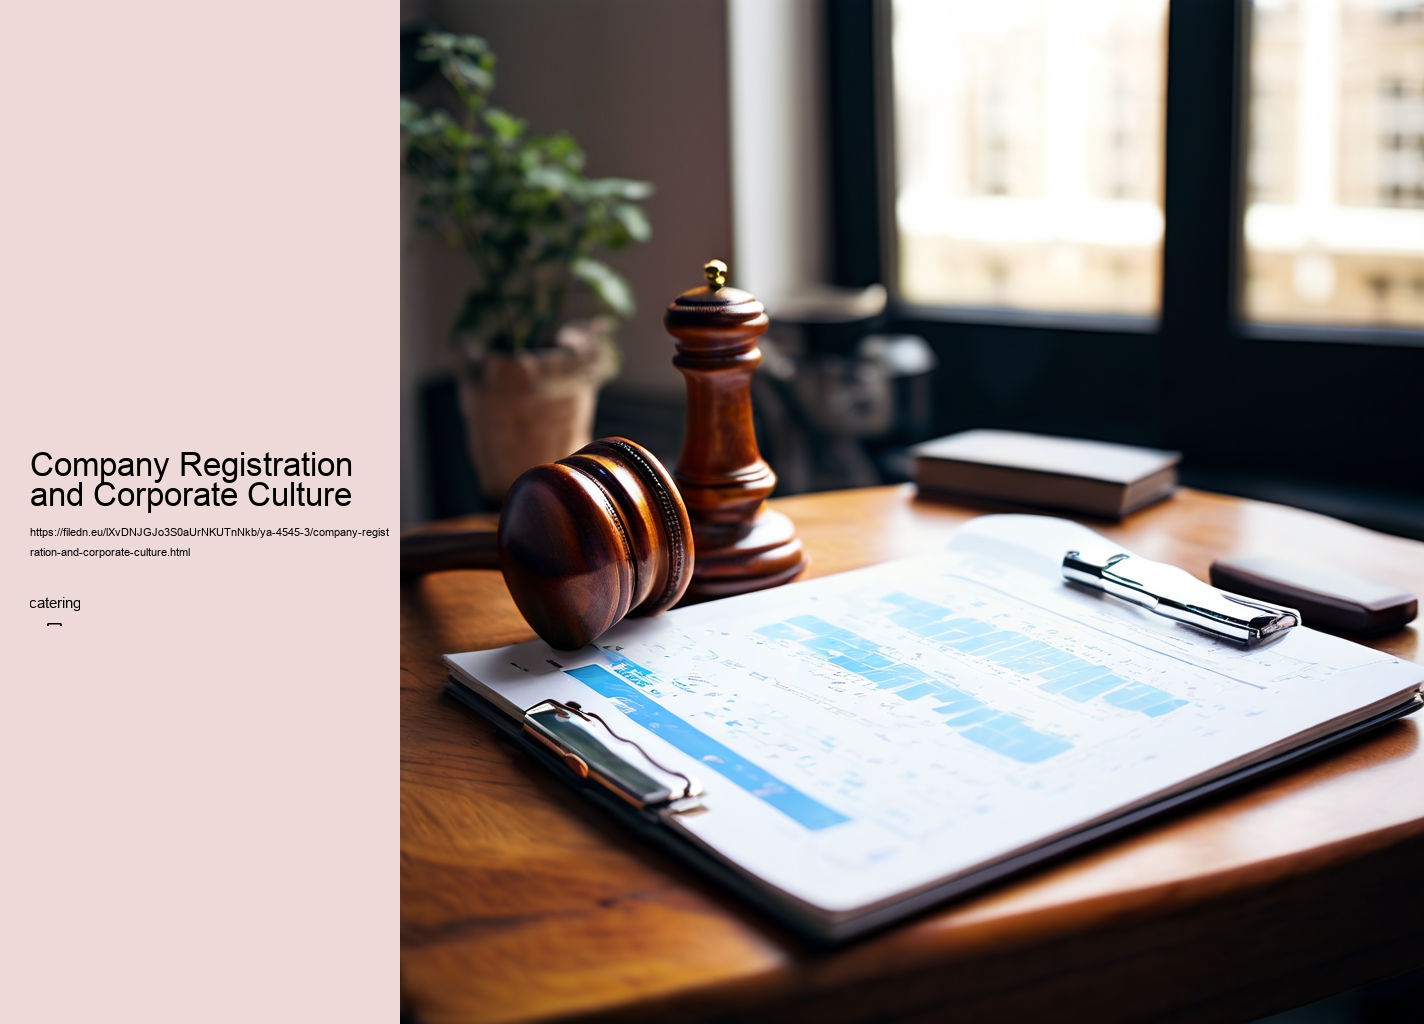 Company Registration and Corporate Culture